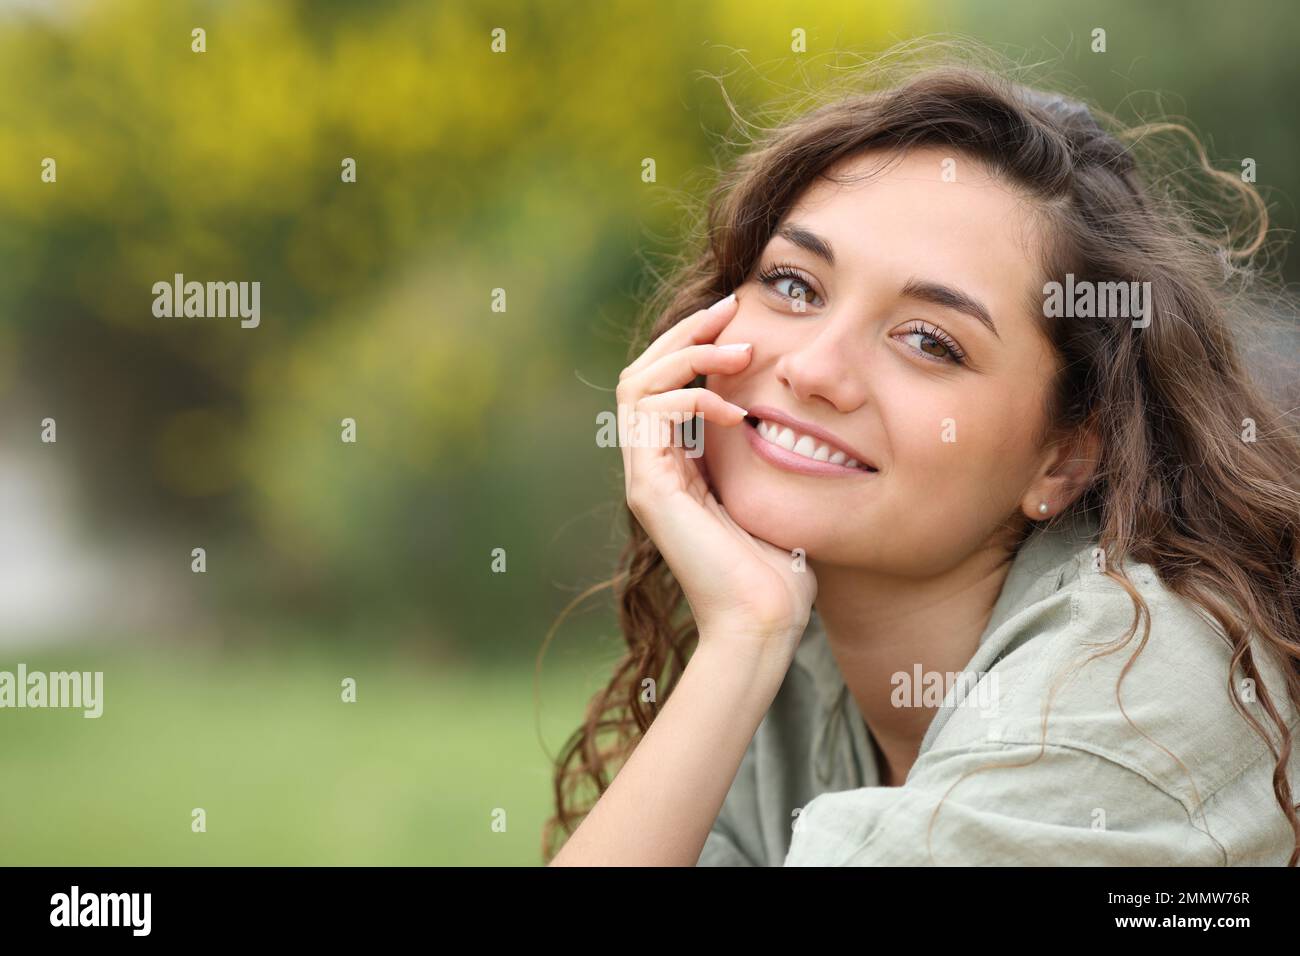 Portrait of a beautiful woman smiling at you in a park Stock Photo